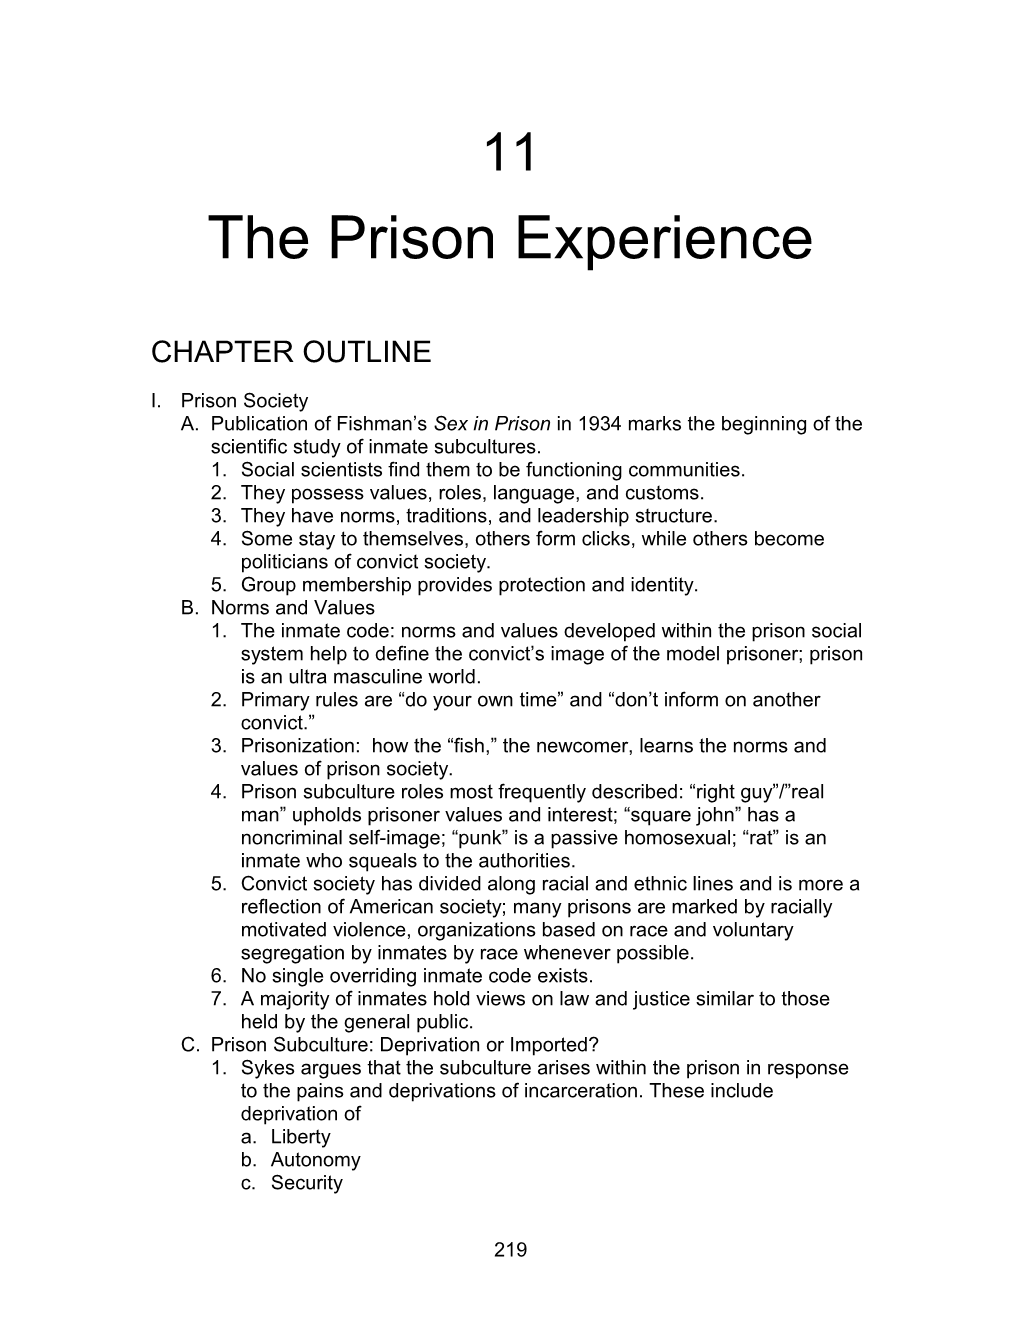 The Prison Experience